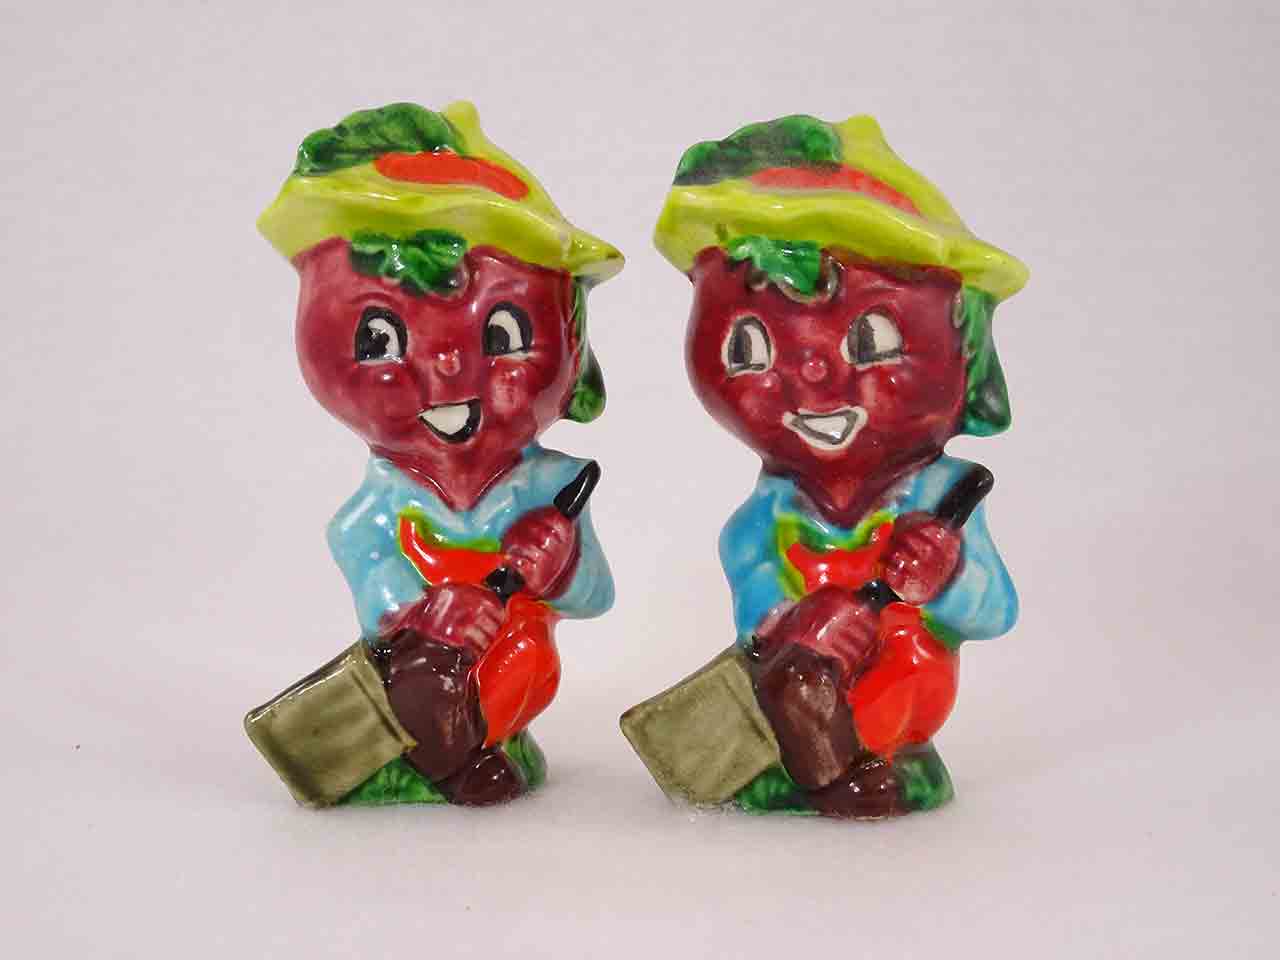 Anthropomorphic vegetable farms salt and pepper shakers called "Country Cousins" - Beets